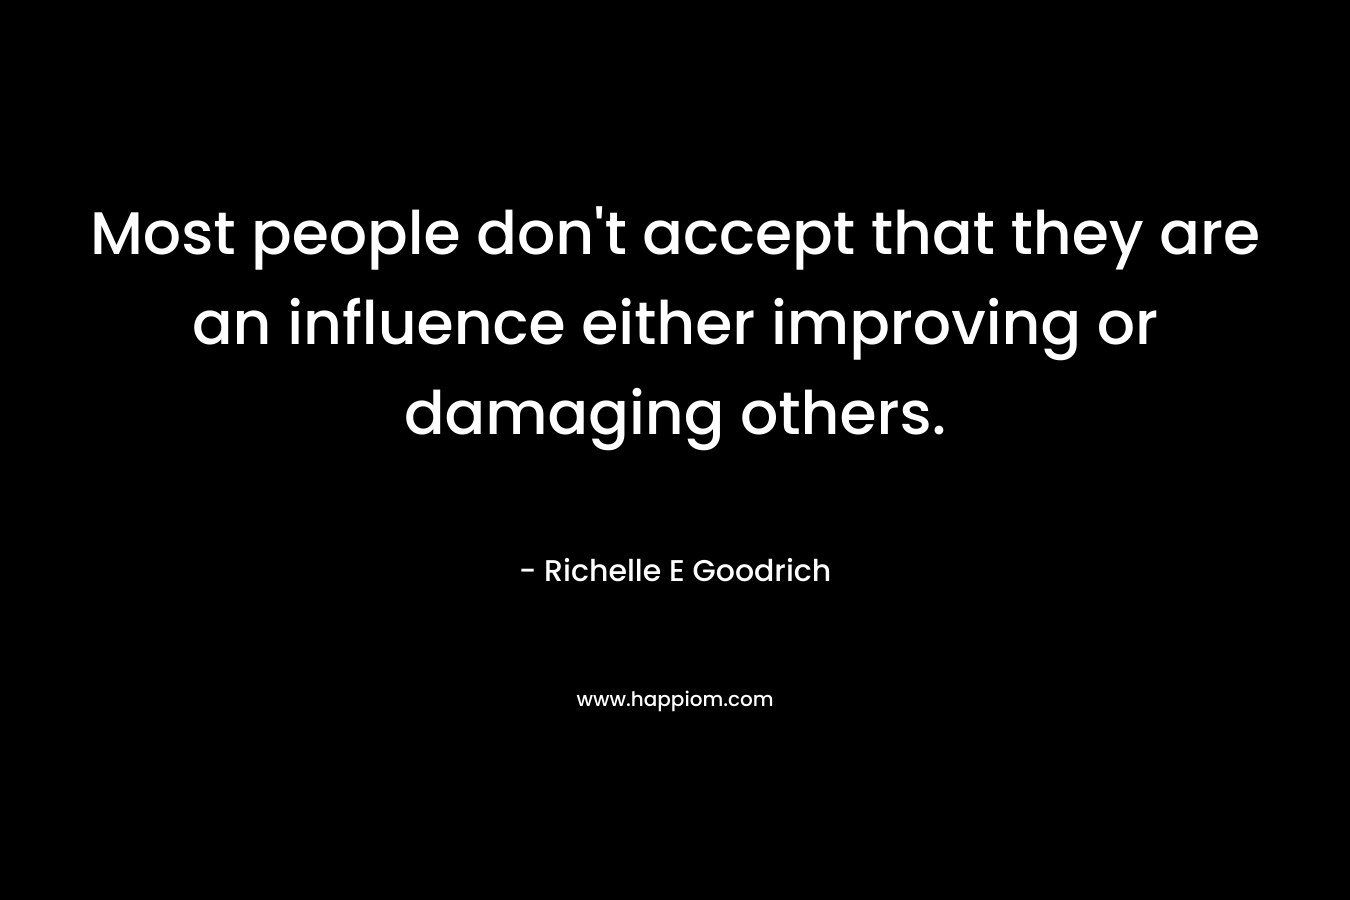 Most people don't accept that they are an influence either improving or damaging others.